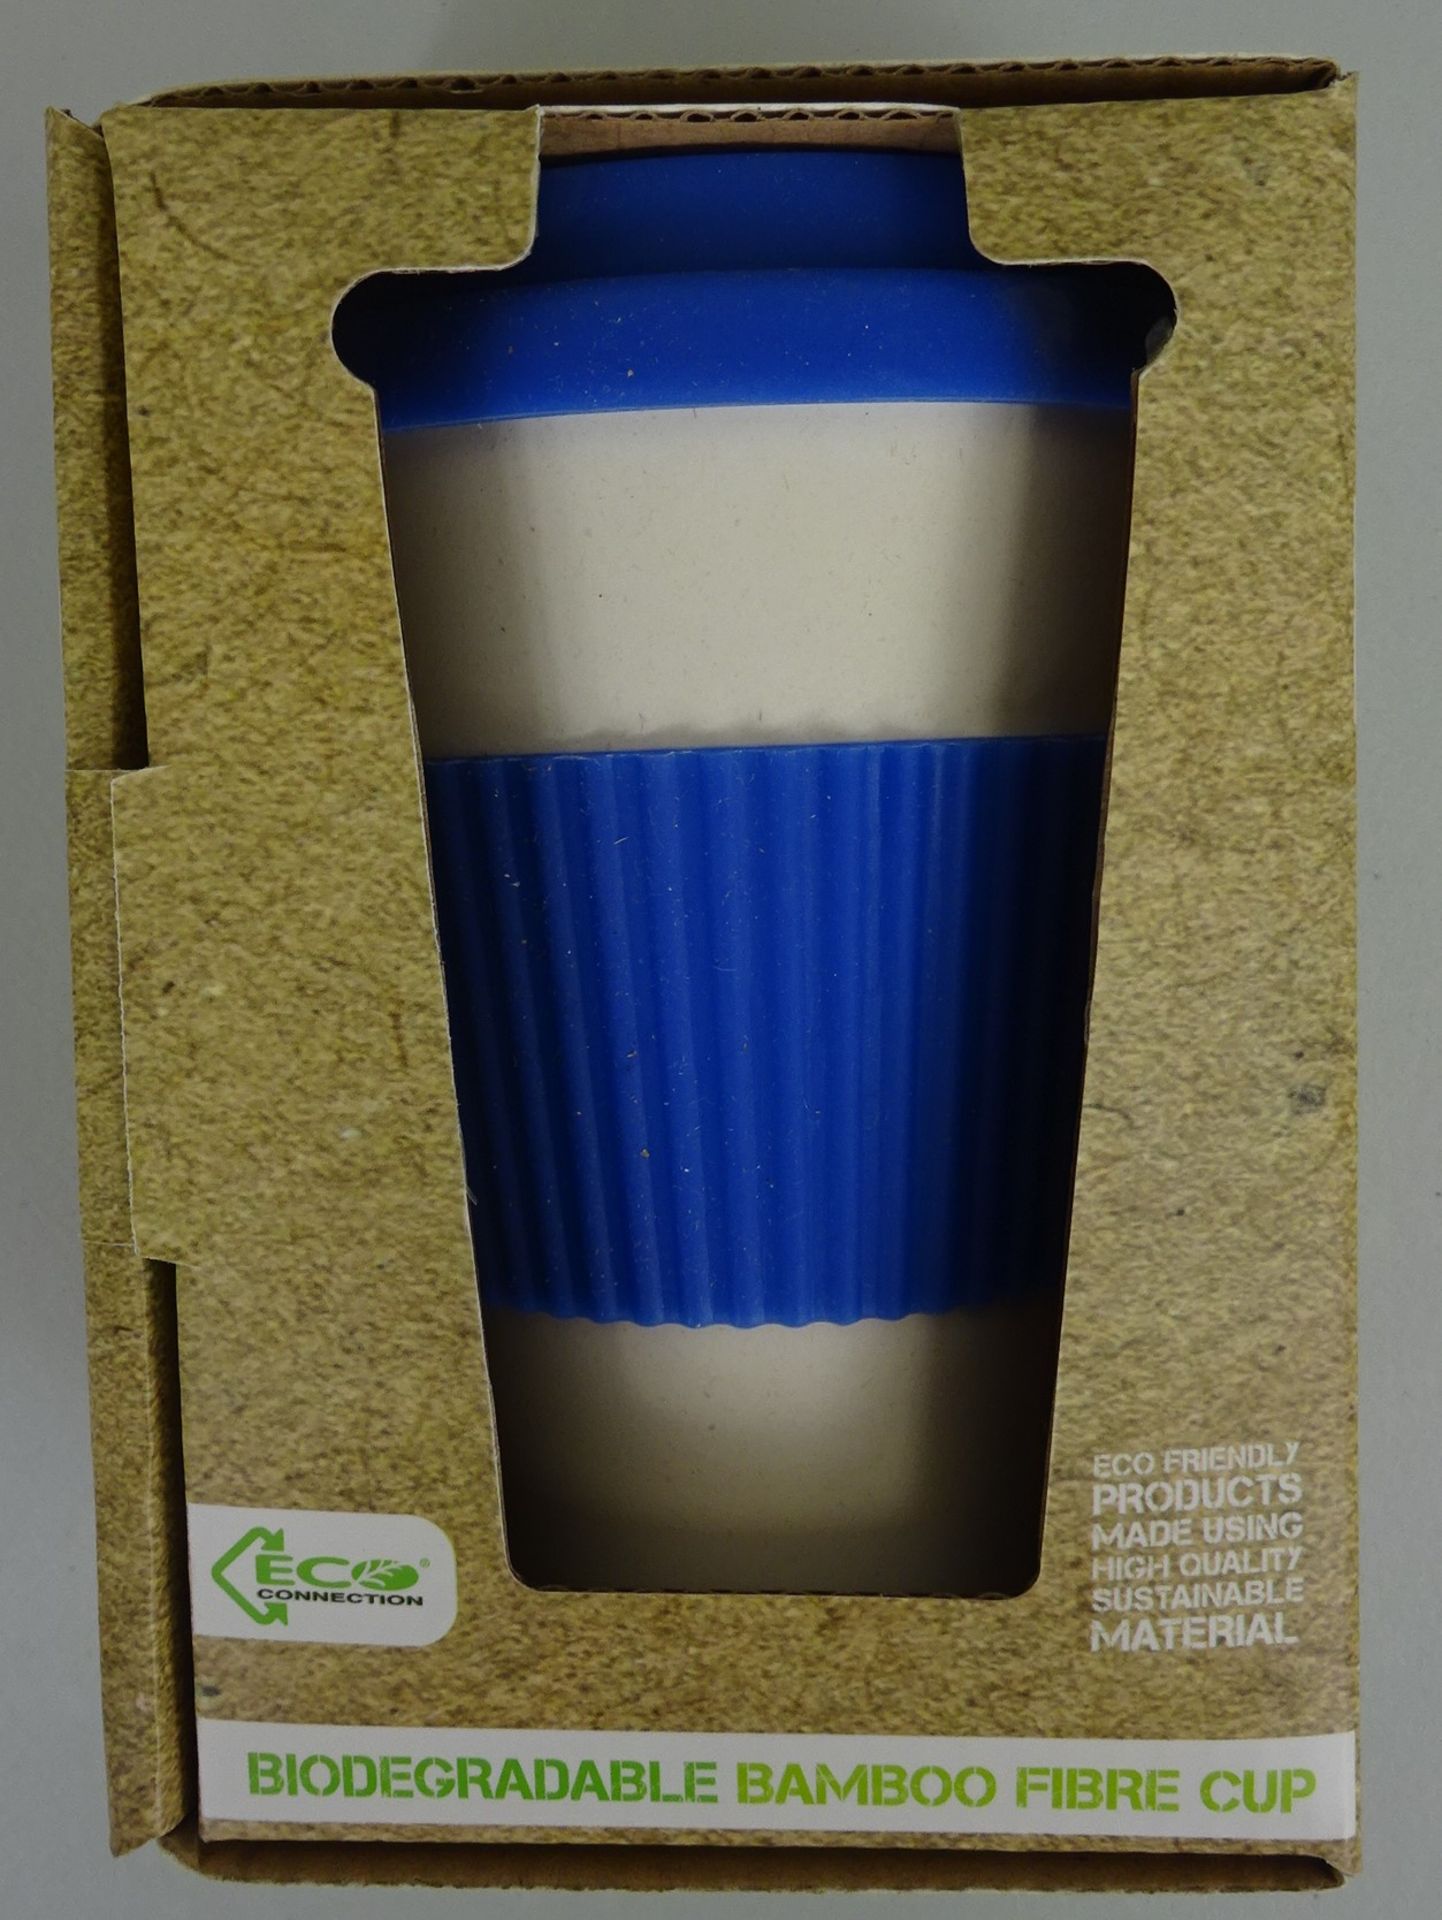 Blue Biodegradable Bamboo Fibre Cup - Image 2 of 2